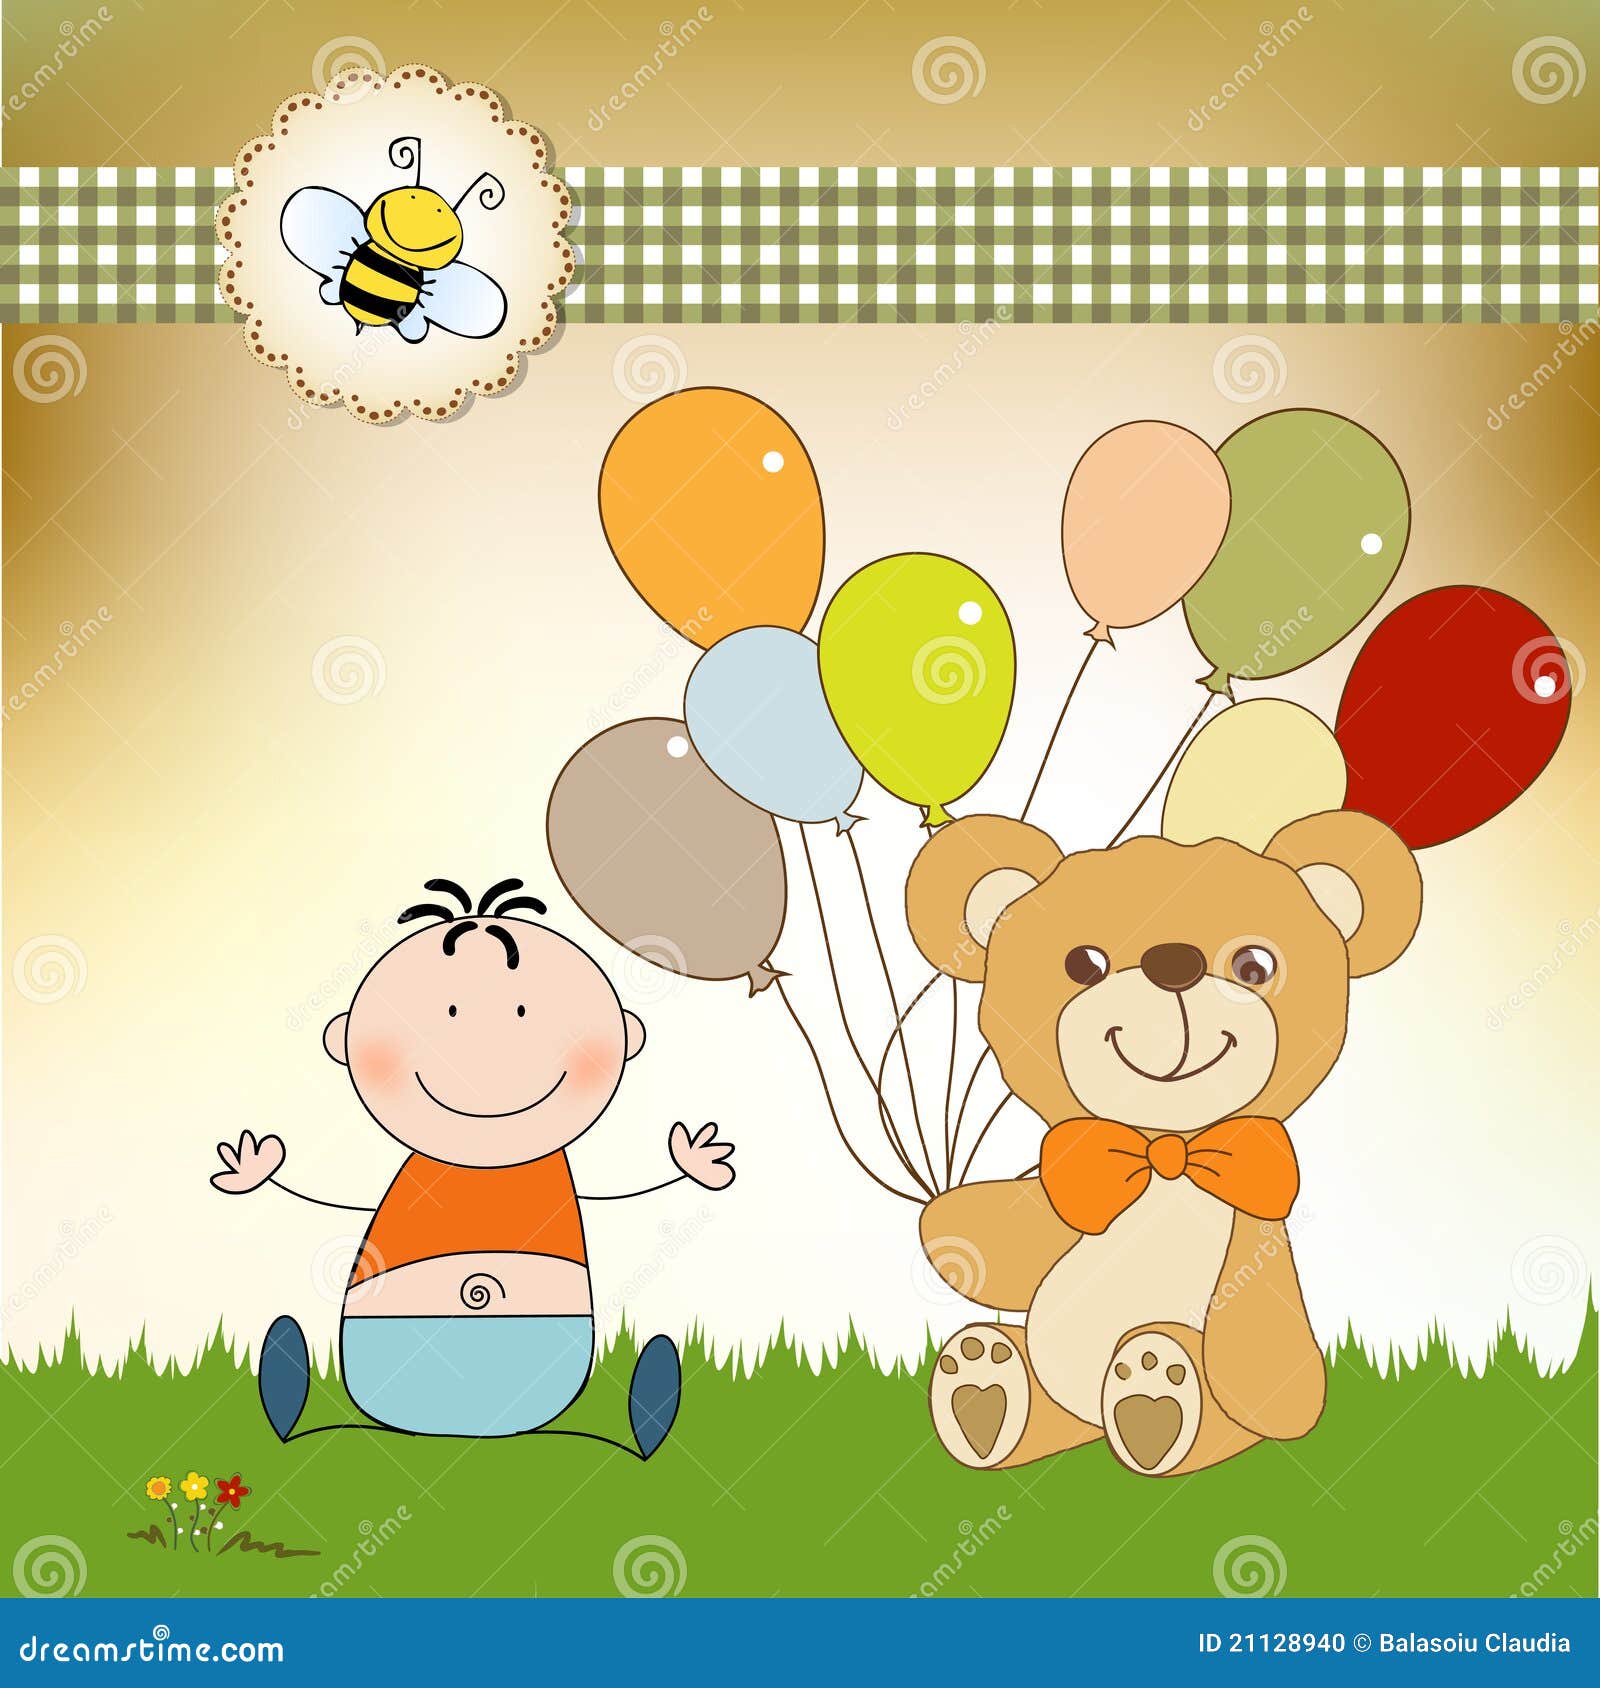 teddy bear with balloons free clipart - photo #46